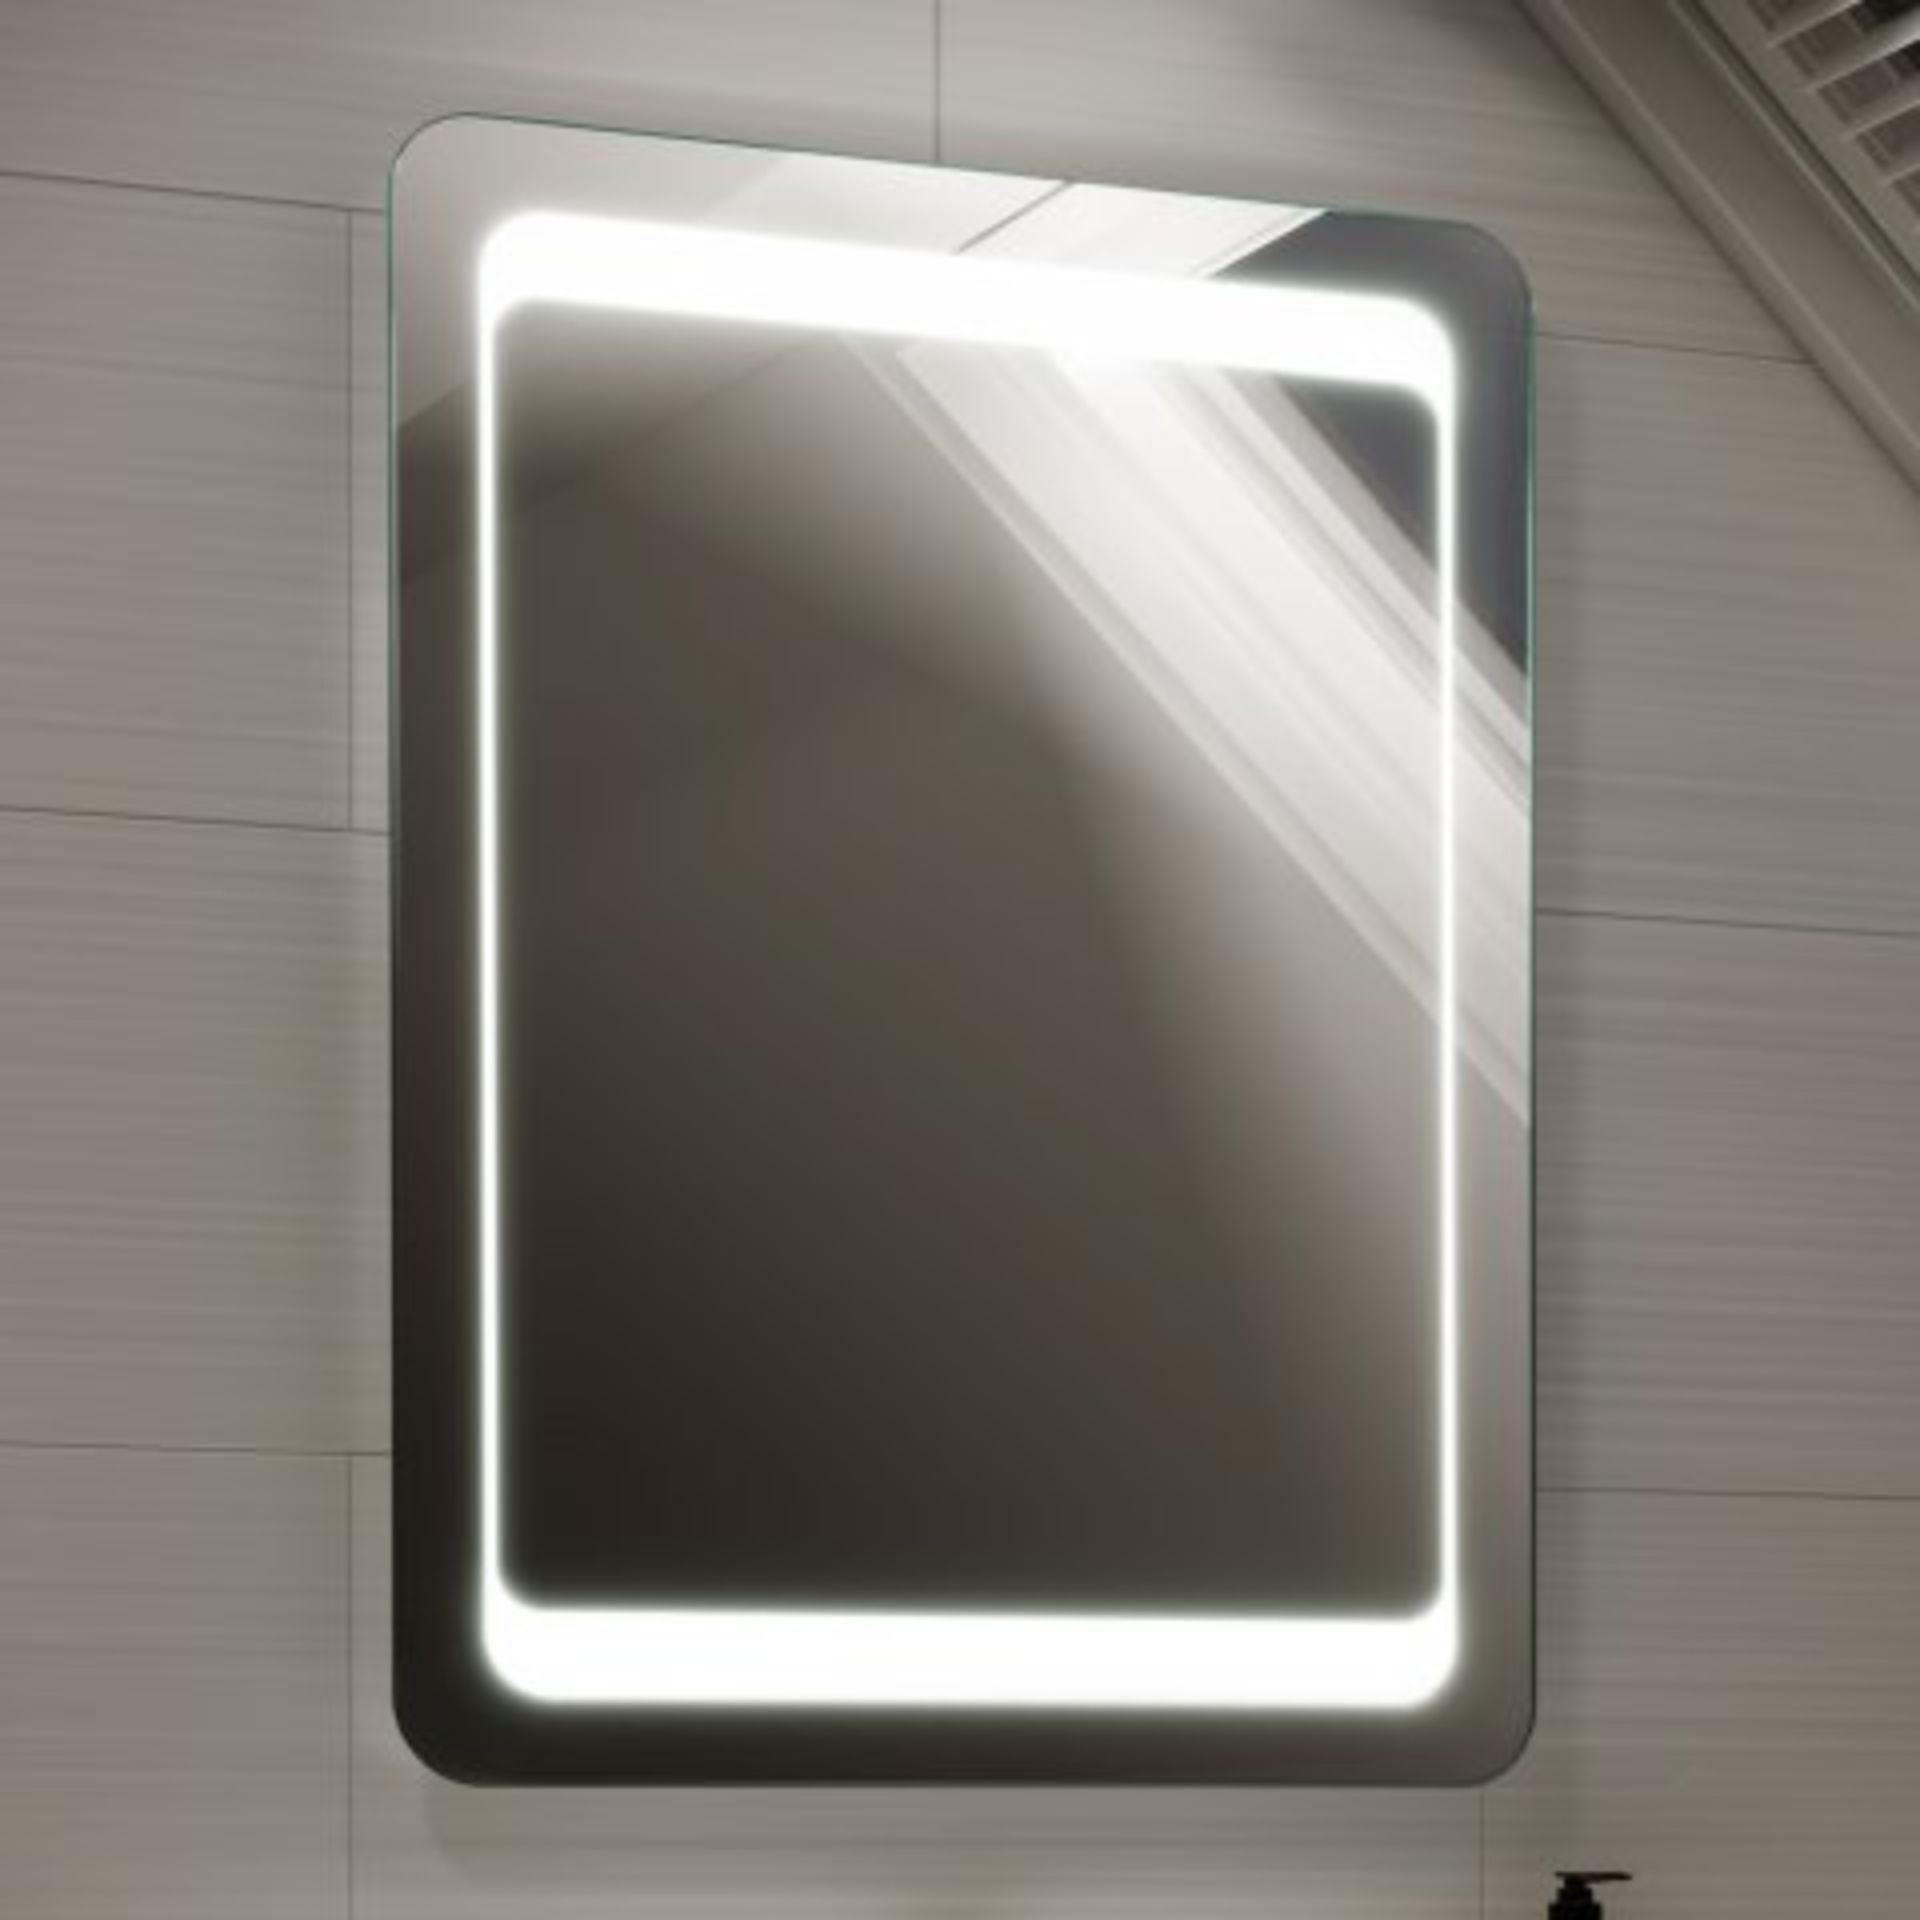 (N71) 800x600mm Quasar Illuminated LED Mirror. RRP £349.99. Energy efficient LED lighting with - Image 2 of 5